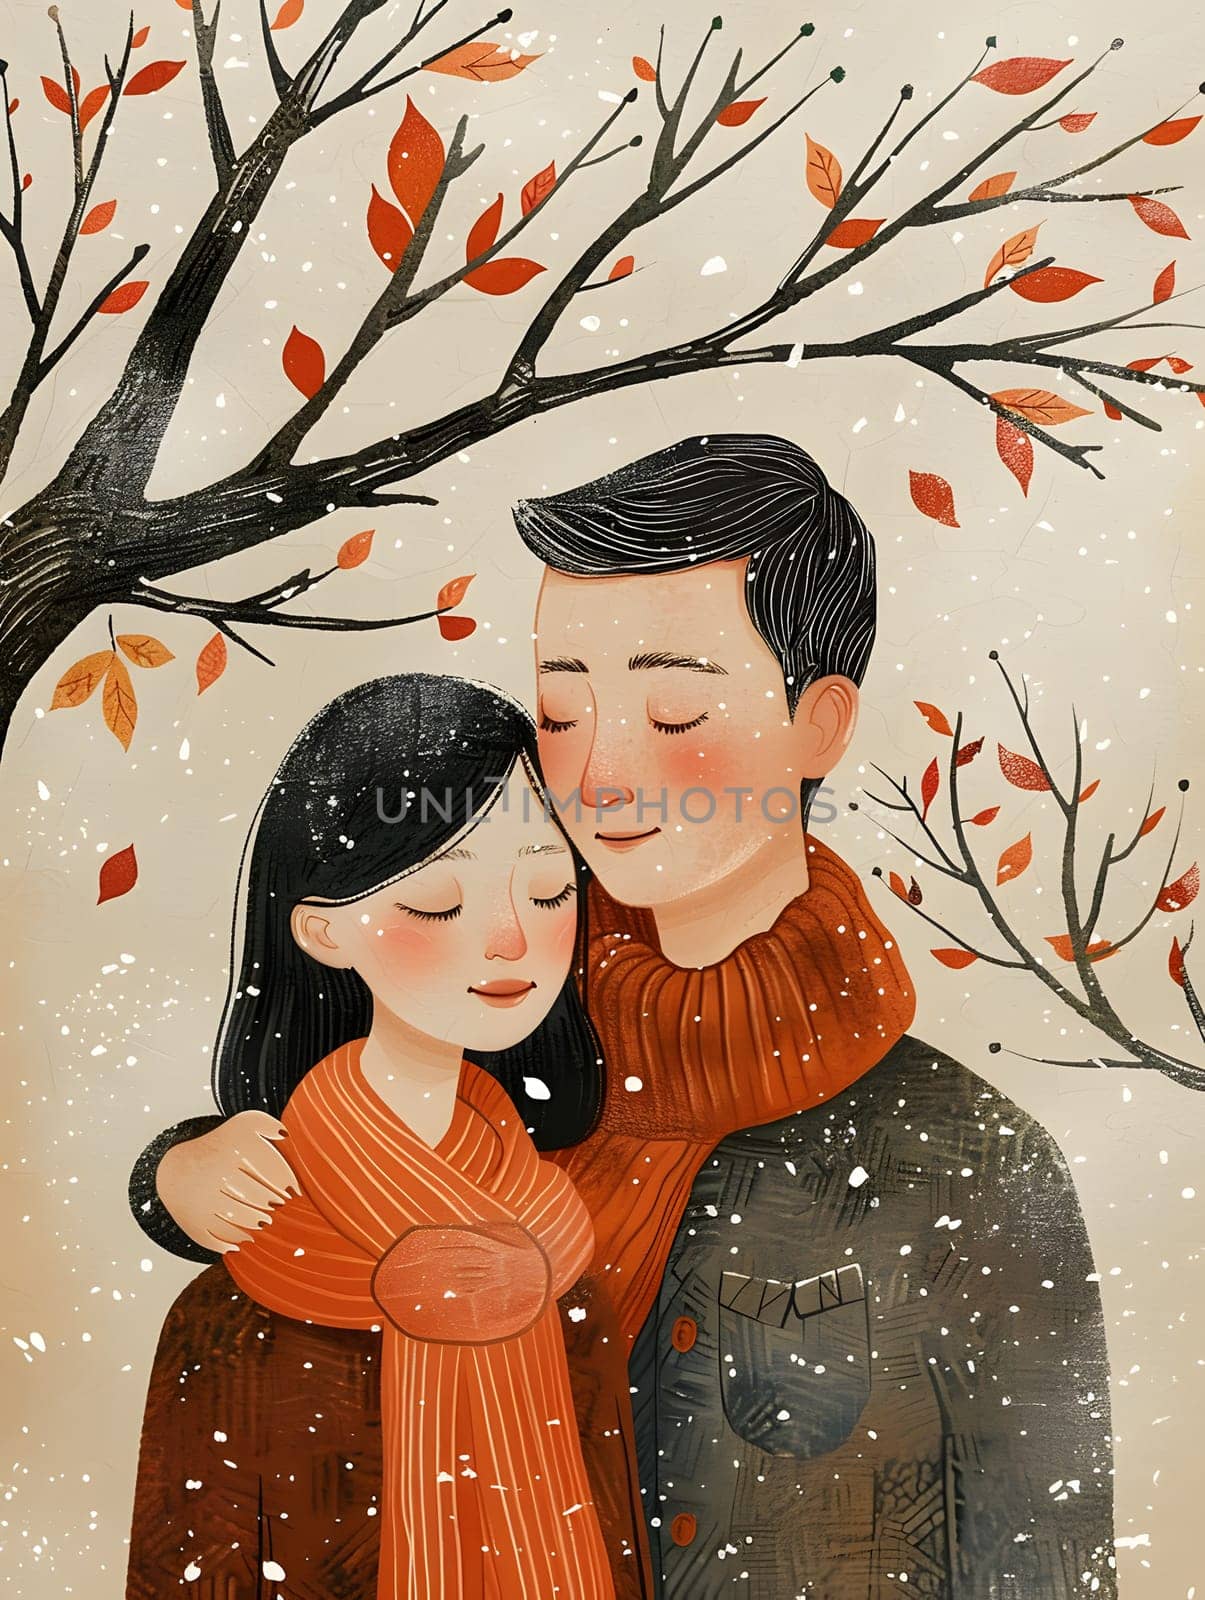 A man and a woman are embracing under a snowy tree with smiles on their faces. The scene looks like a painting with a vintage feel, capturing a happy and romantic moment in the snow